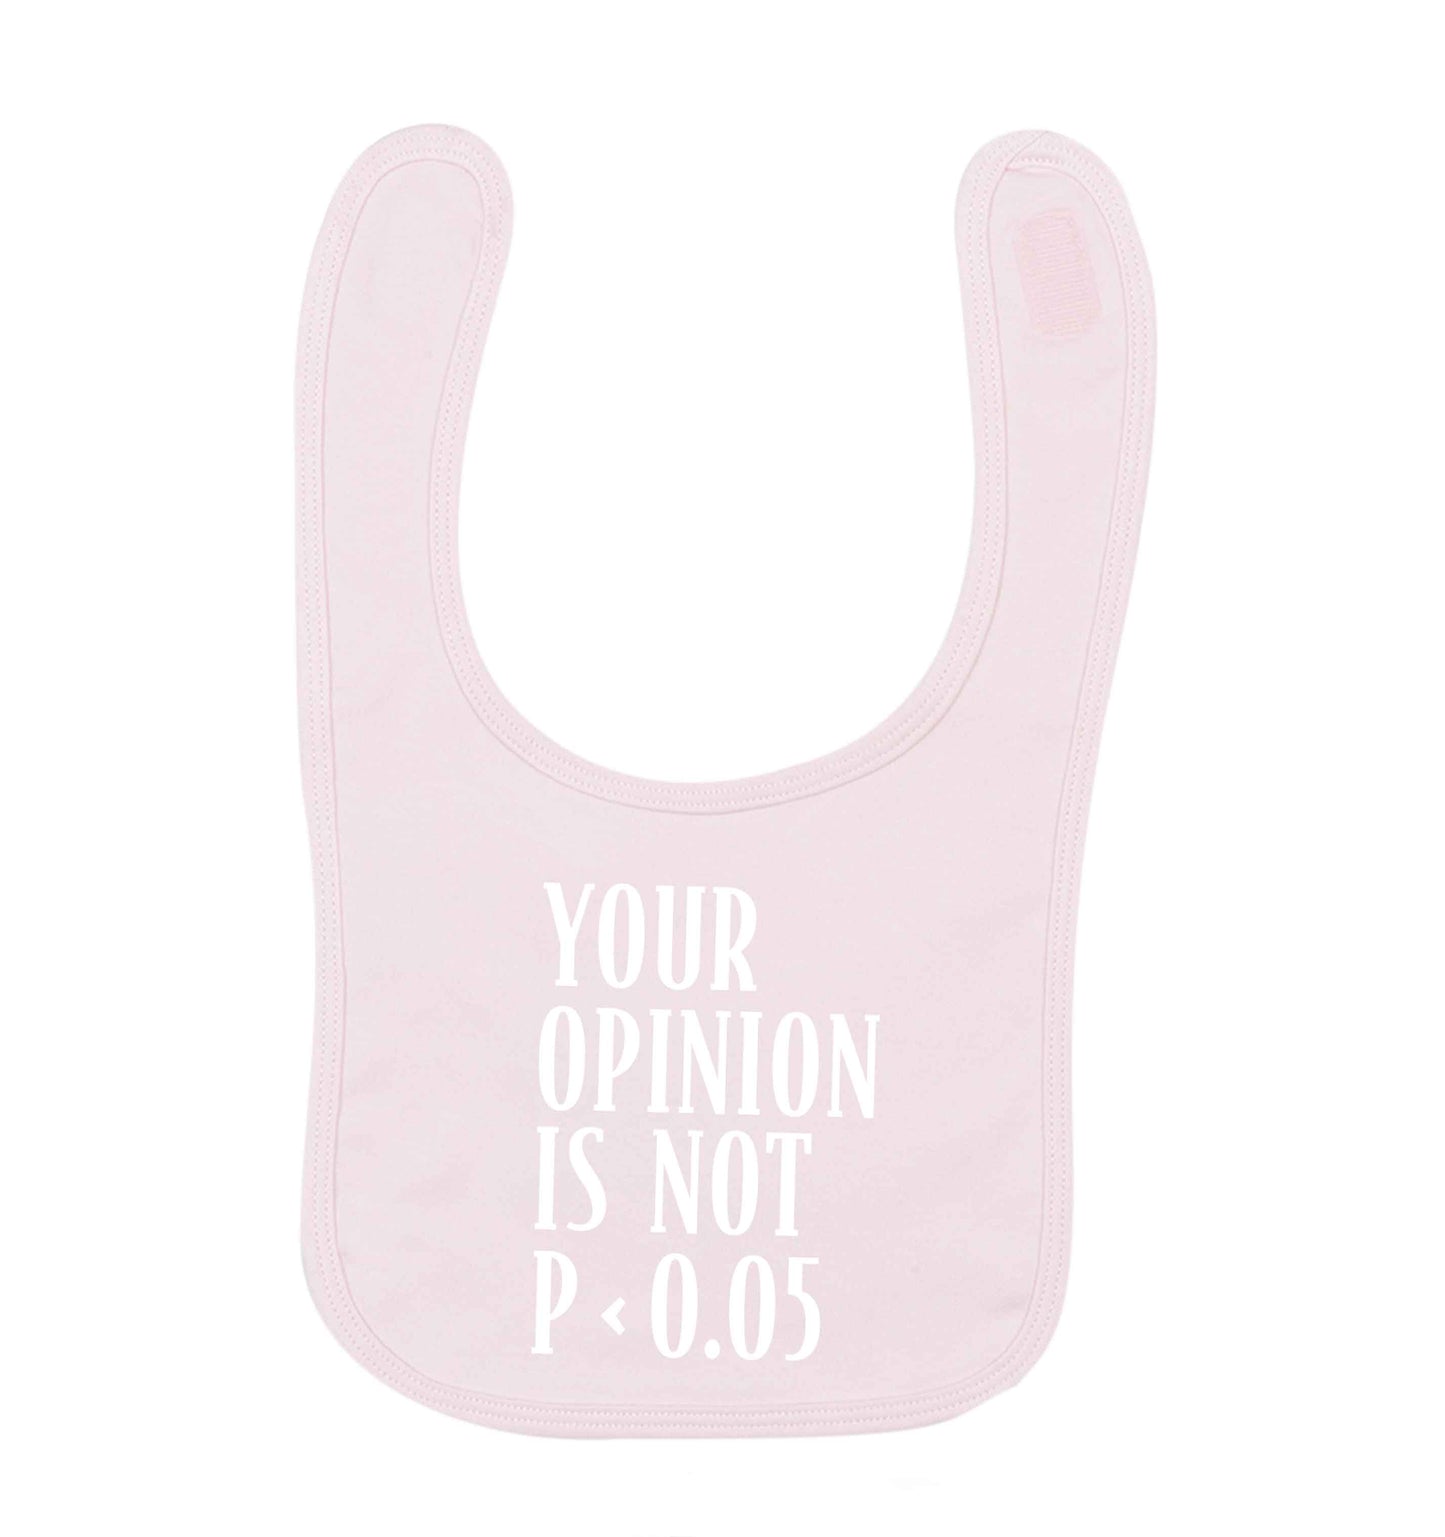 Your opinion is not P < 0.05pale pink baby bib